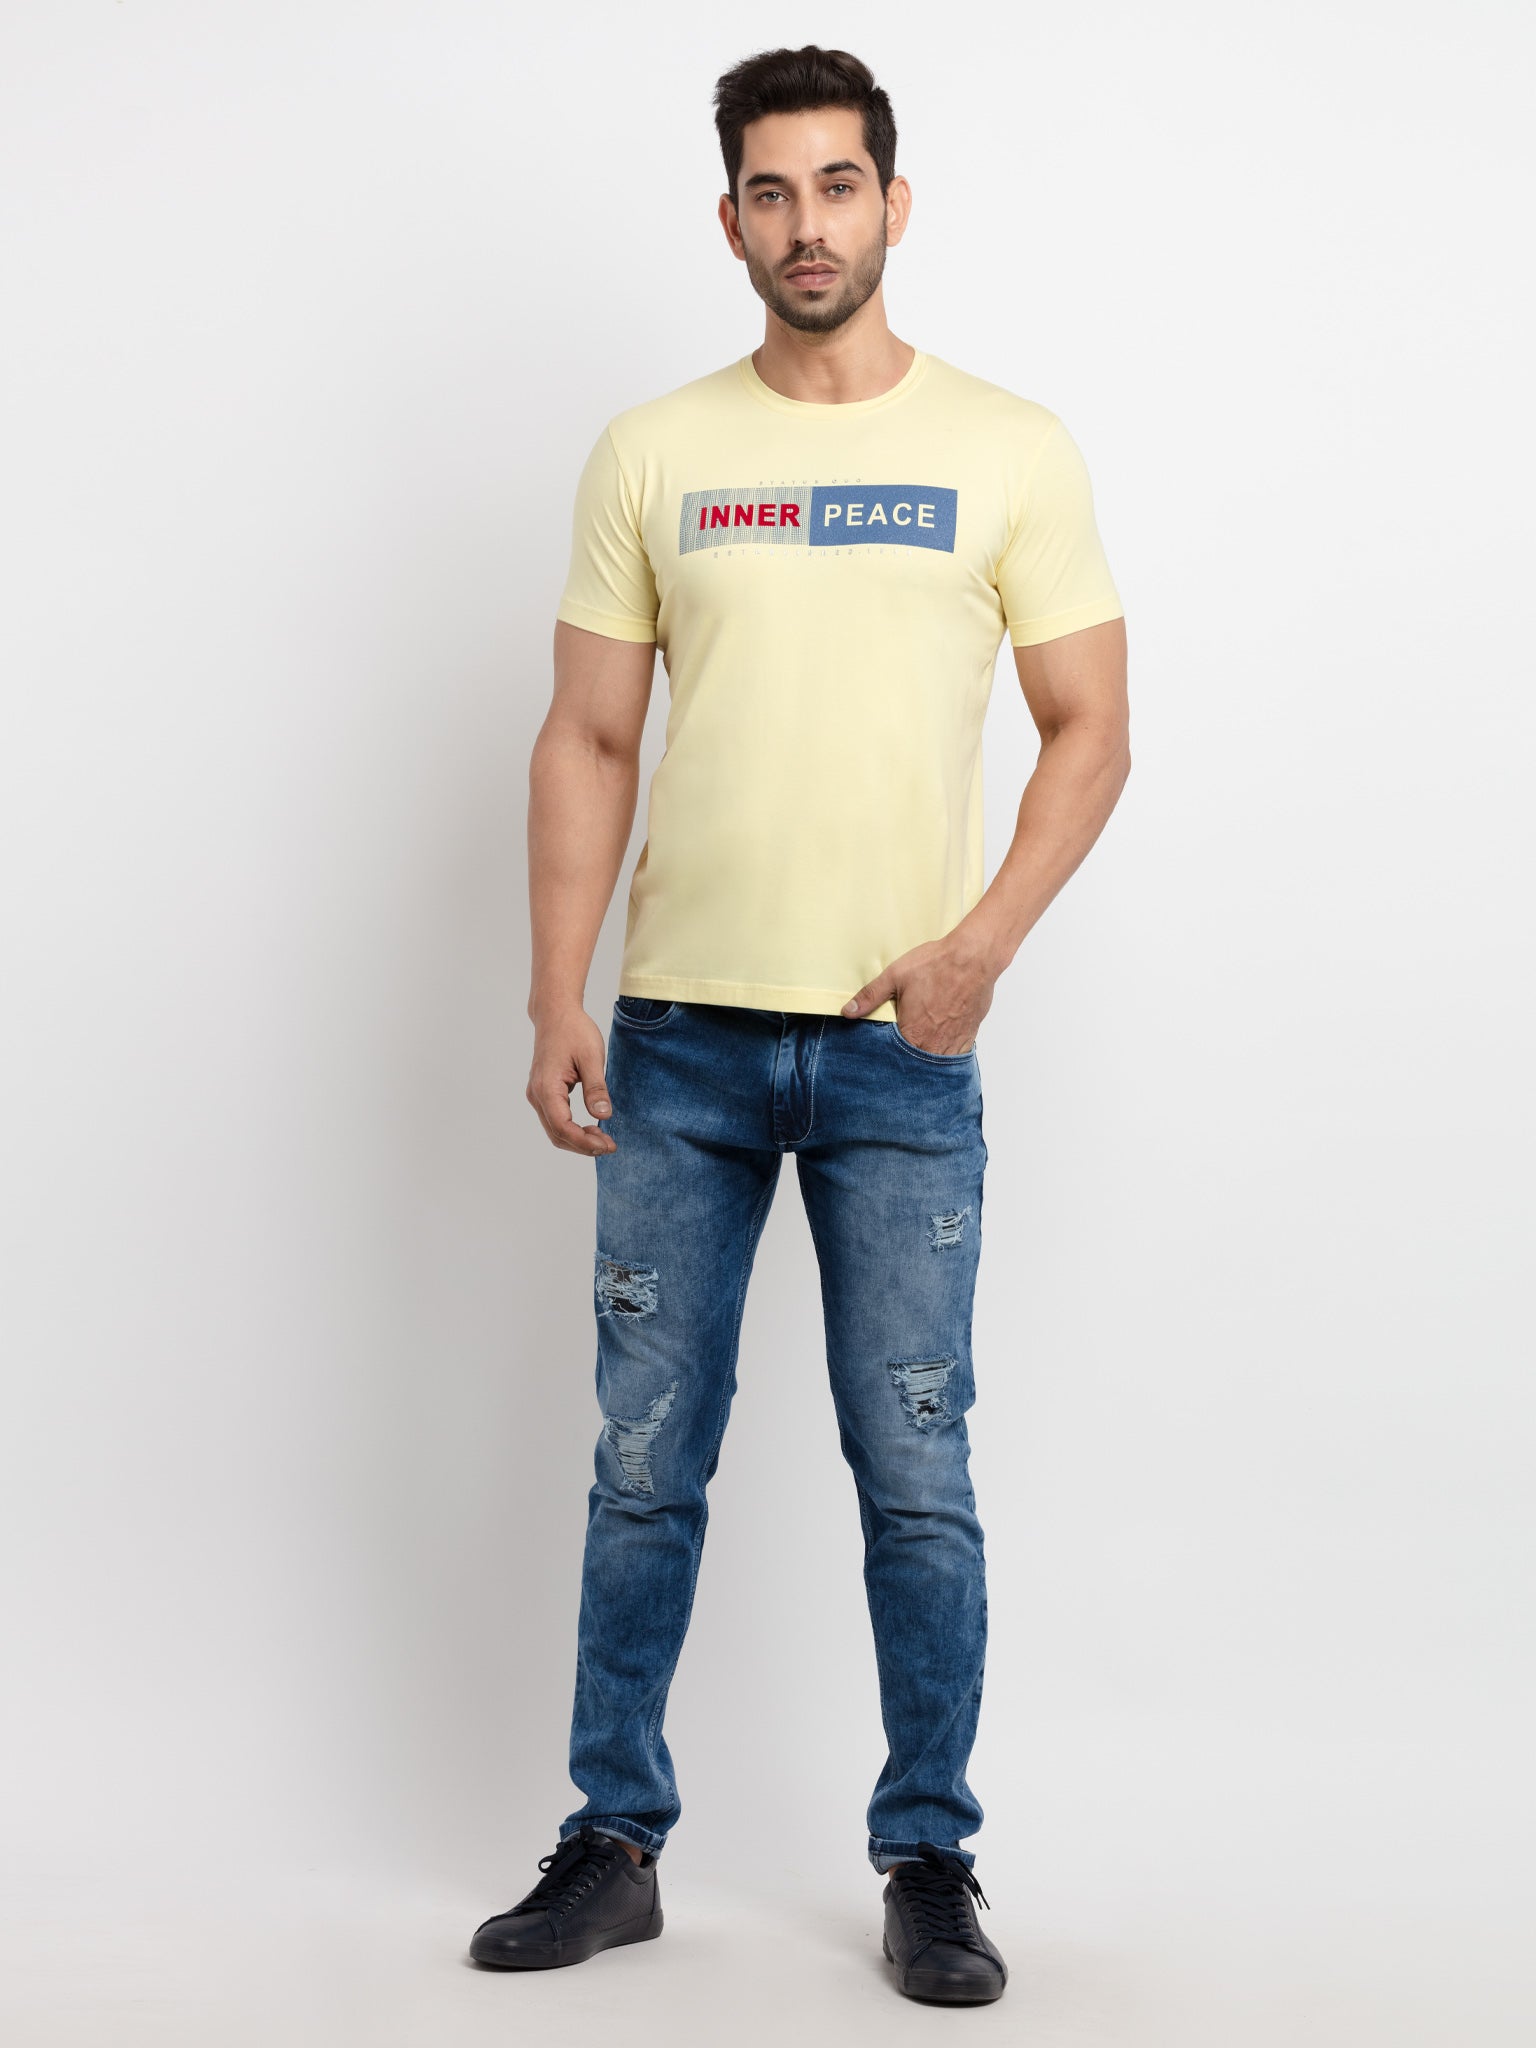 Buy Round Neck T-shirts For Men online at Status Quo